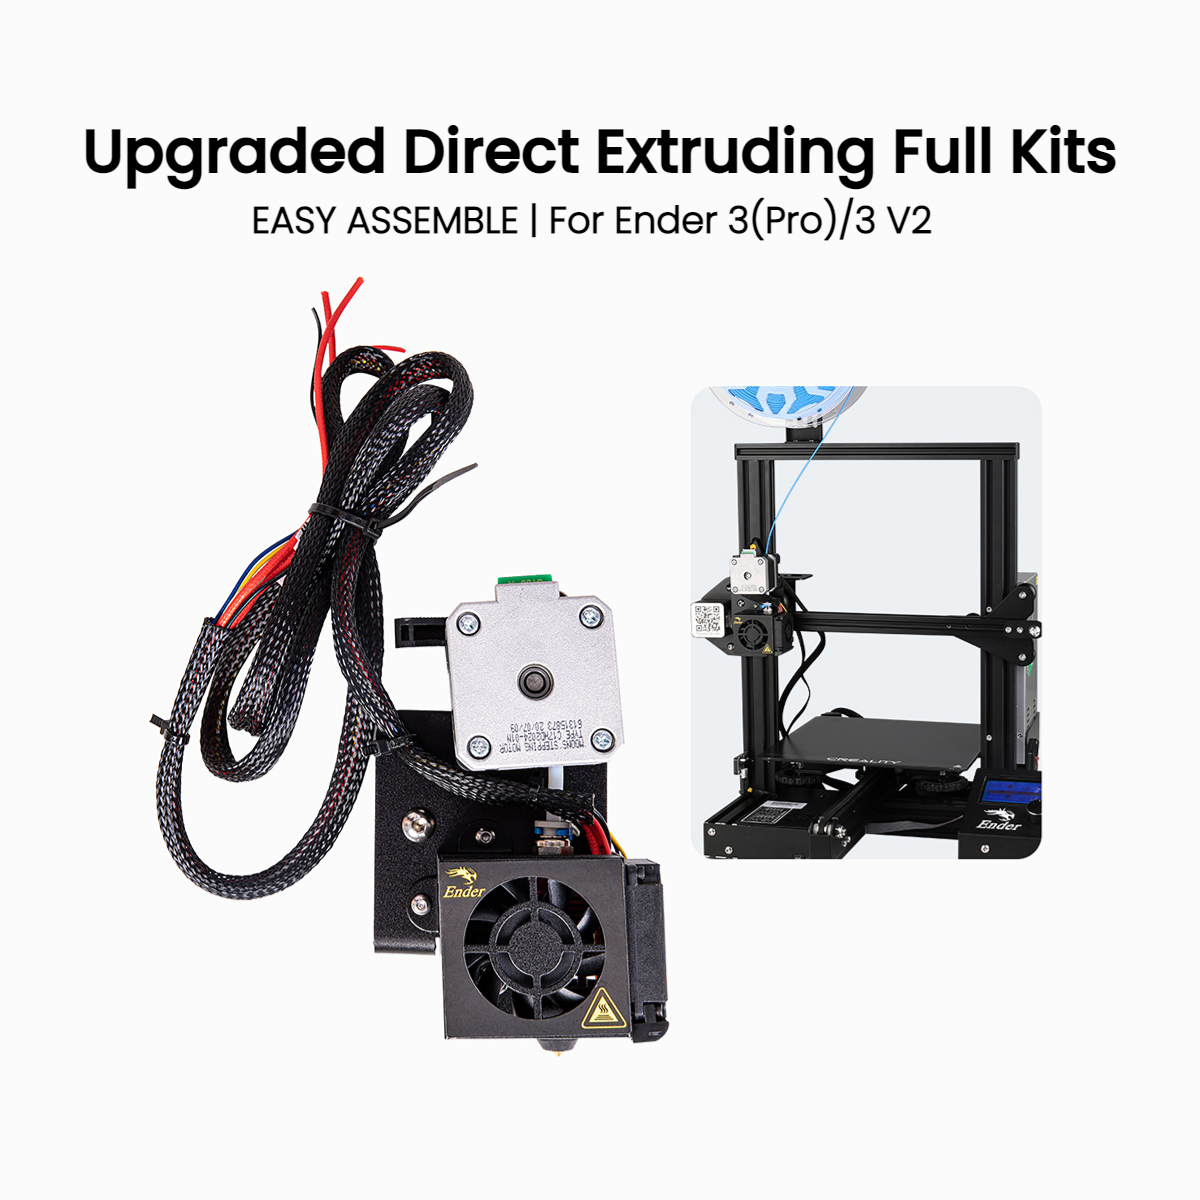 Enhance Your 3D Printing with Top 10 Ender 3 V2 Upgrades